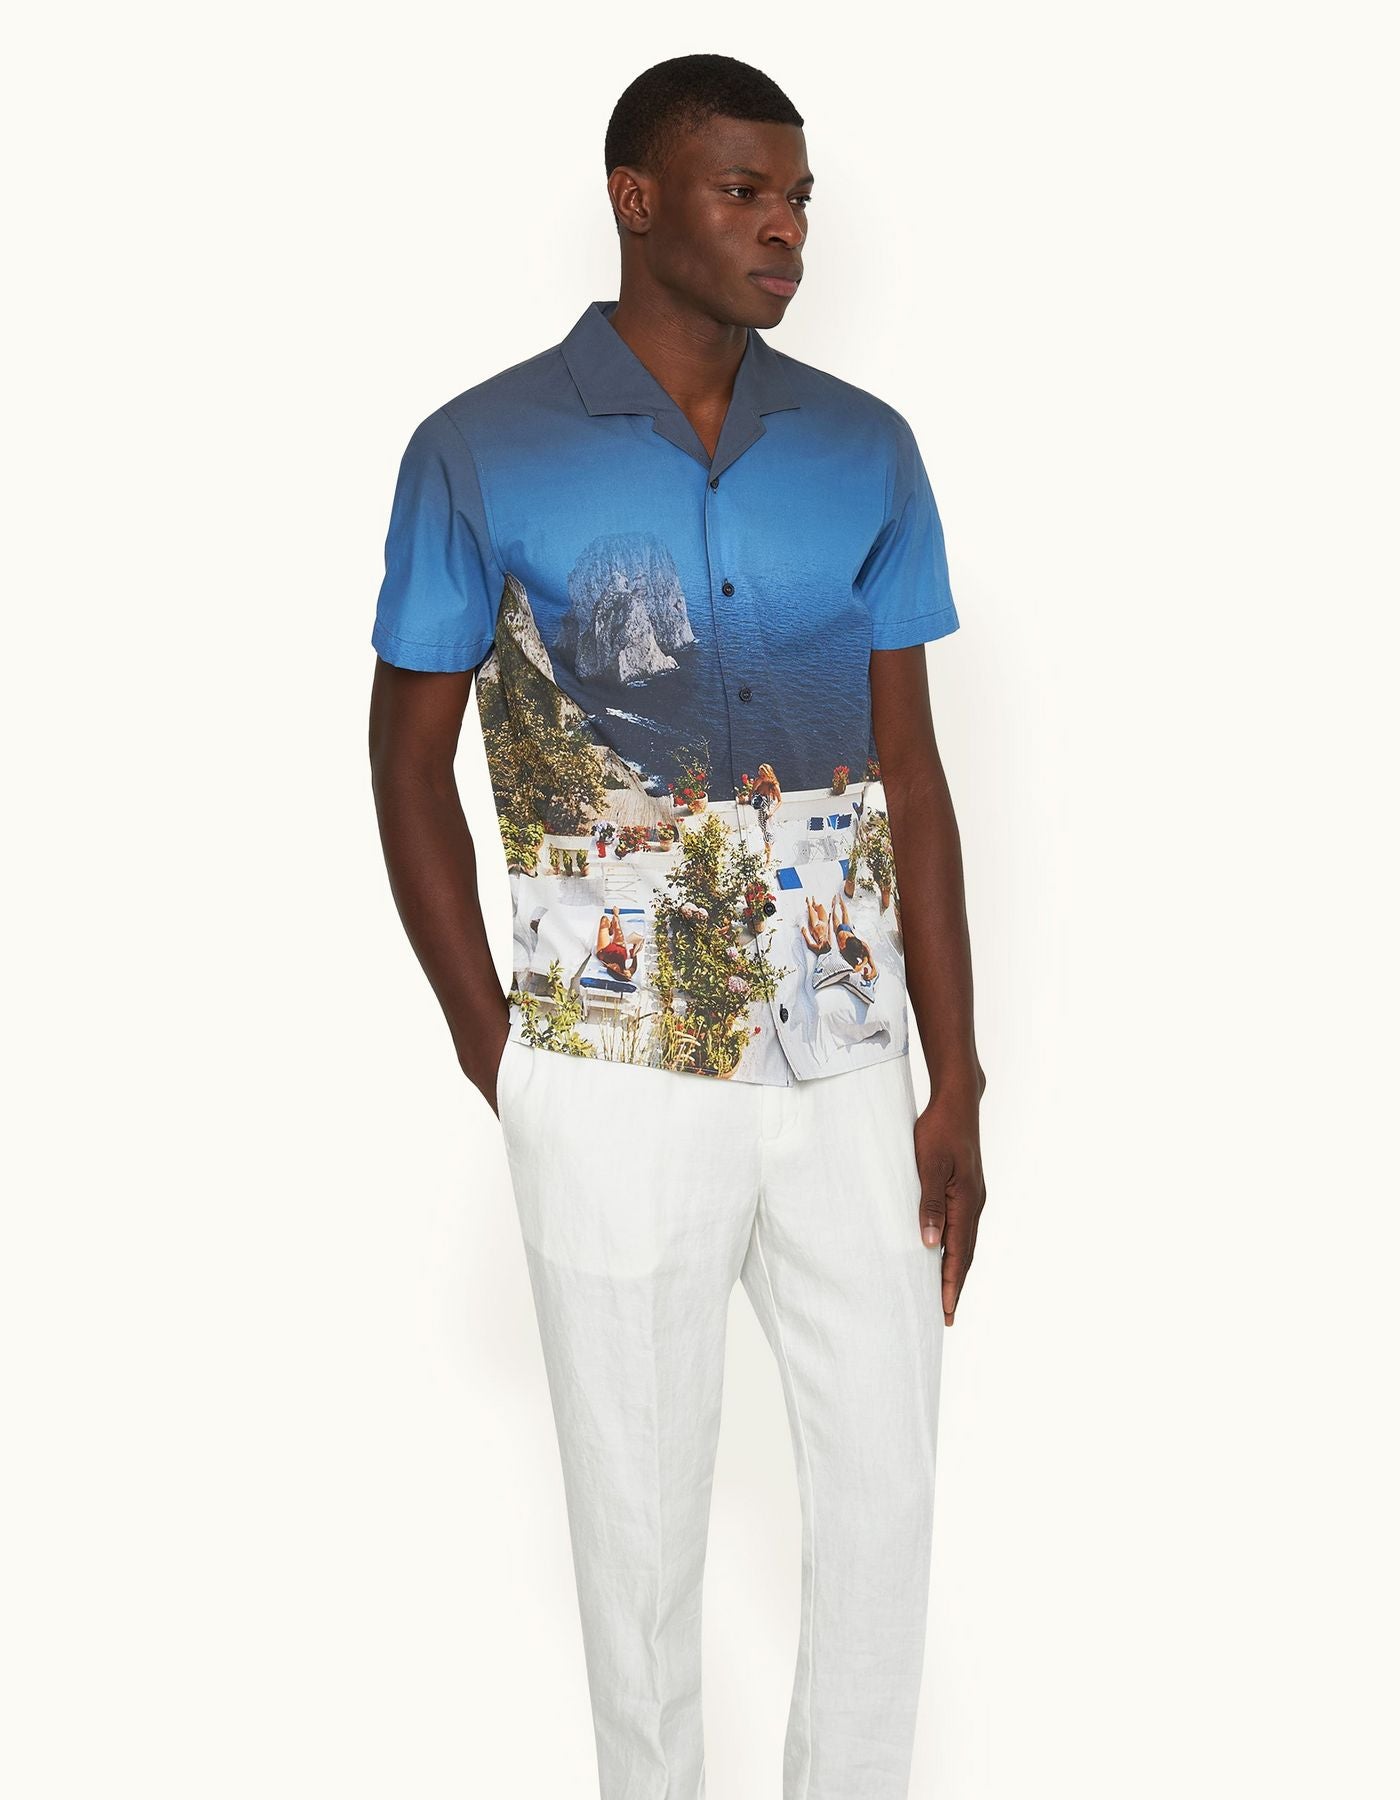 Hibber Photographic Woven Shirt in Terrace